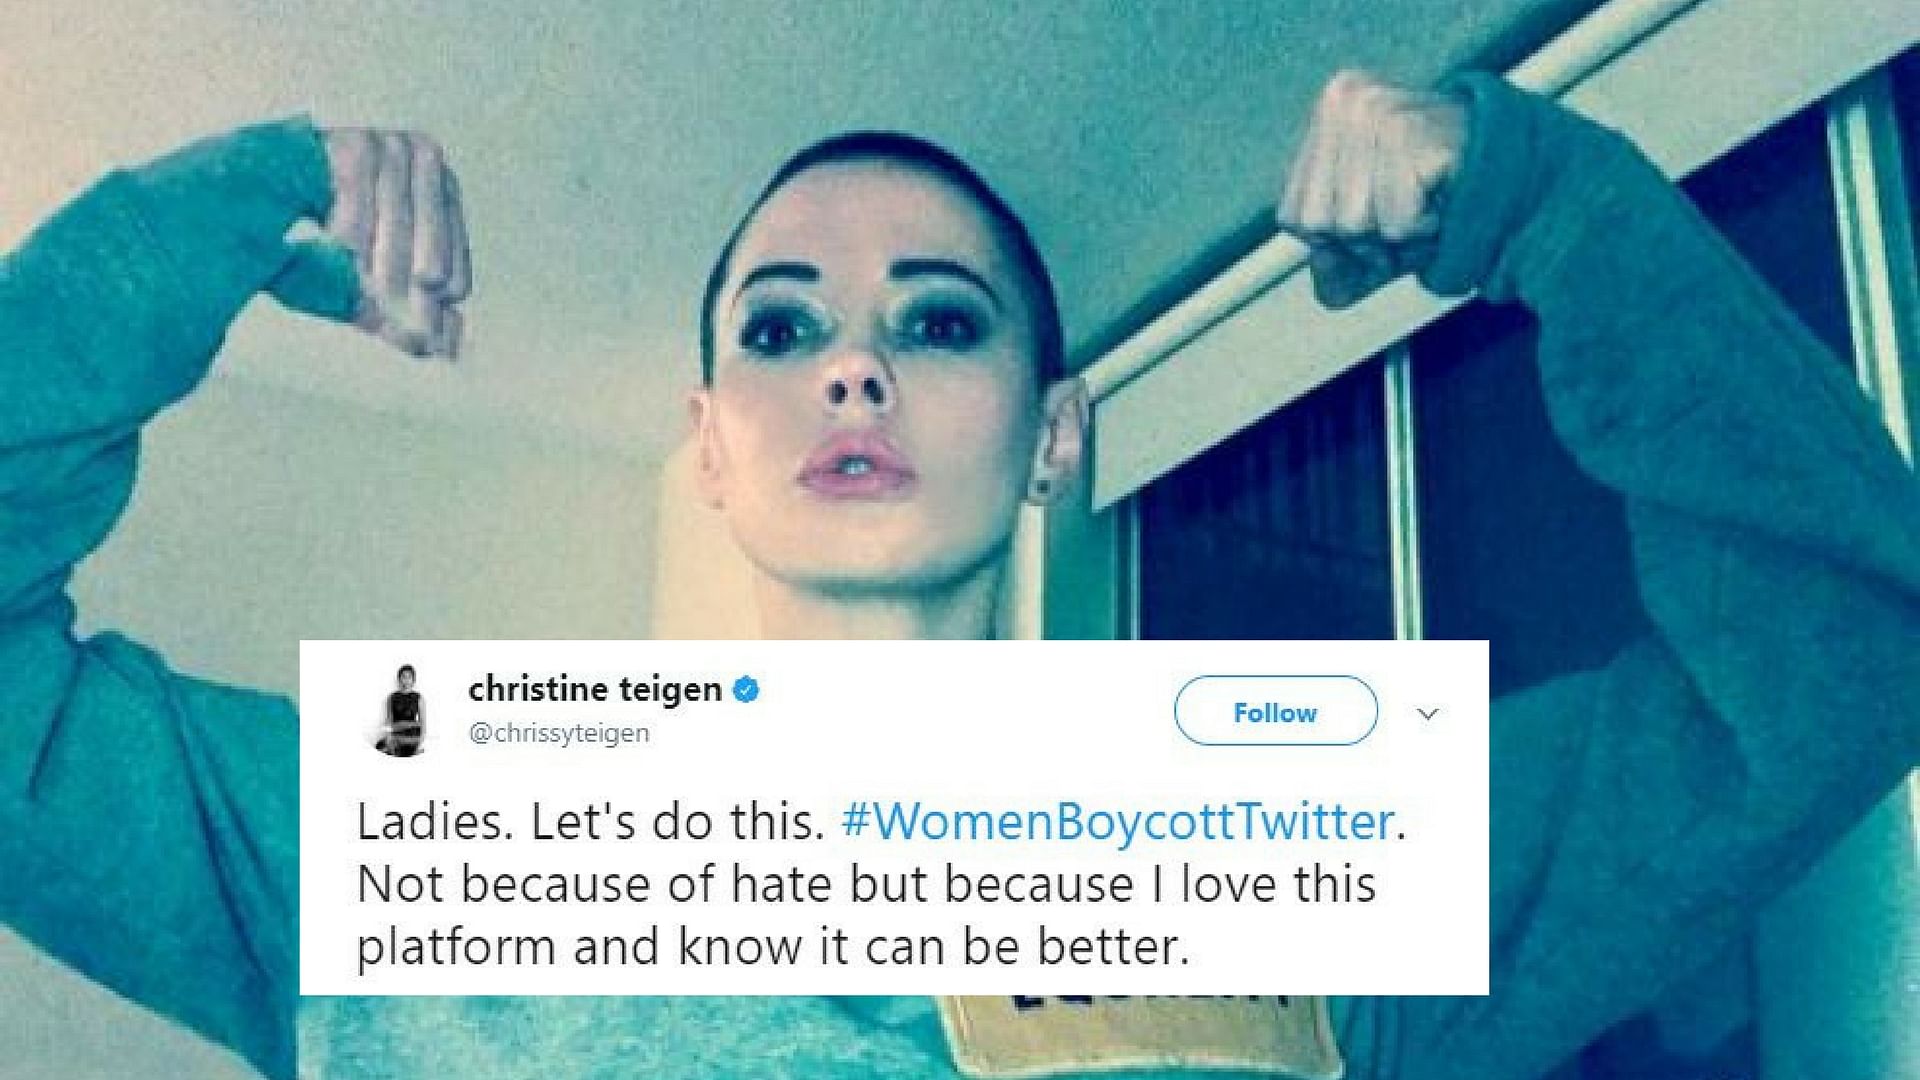 Rose McGowan, whose account was suspended after she spoke out against both Harvey Weinstein and Ben Affleck, provoking the boycott.